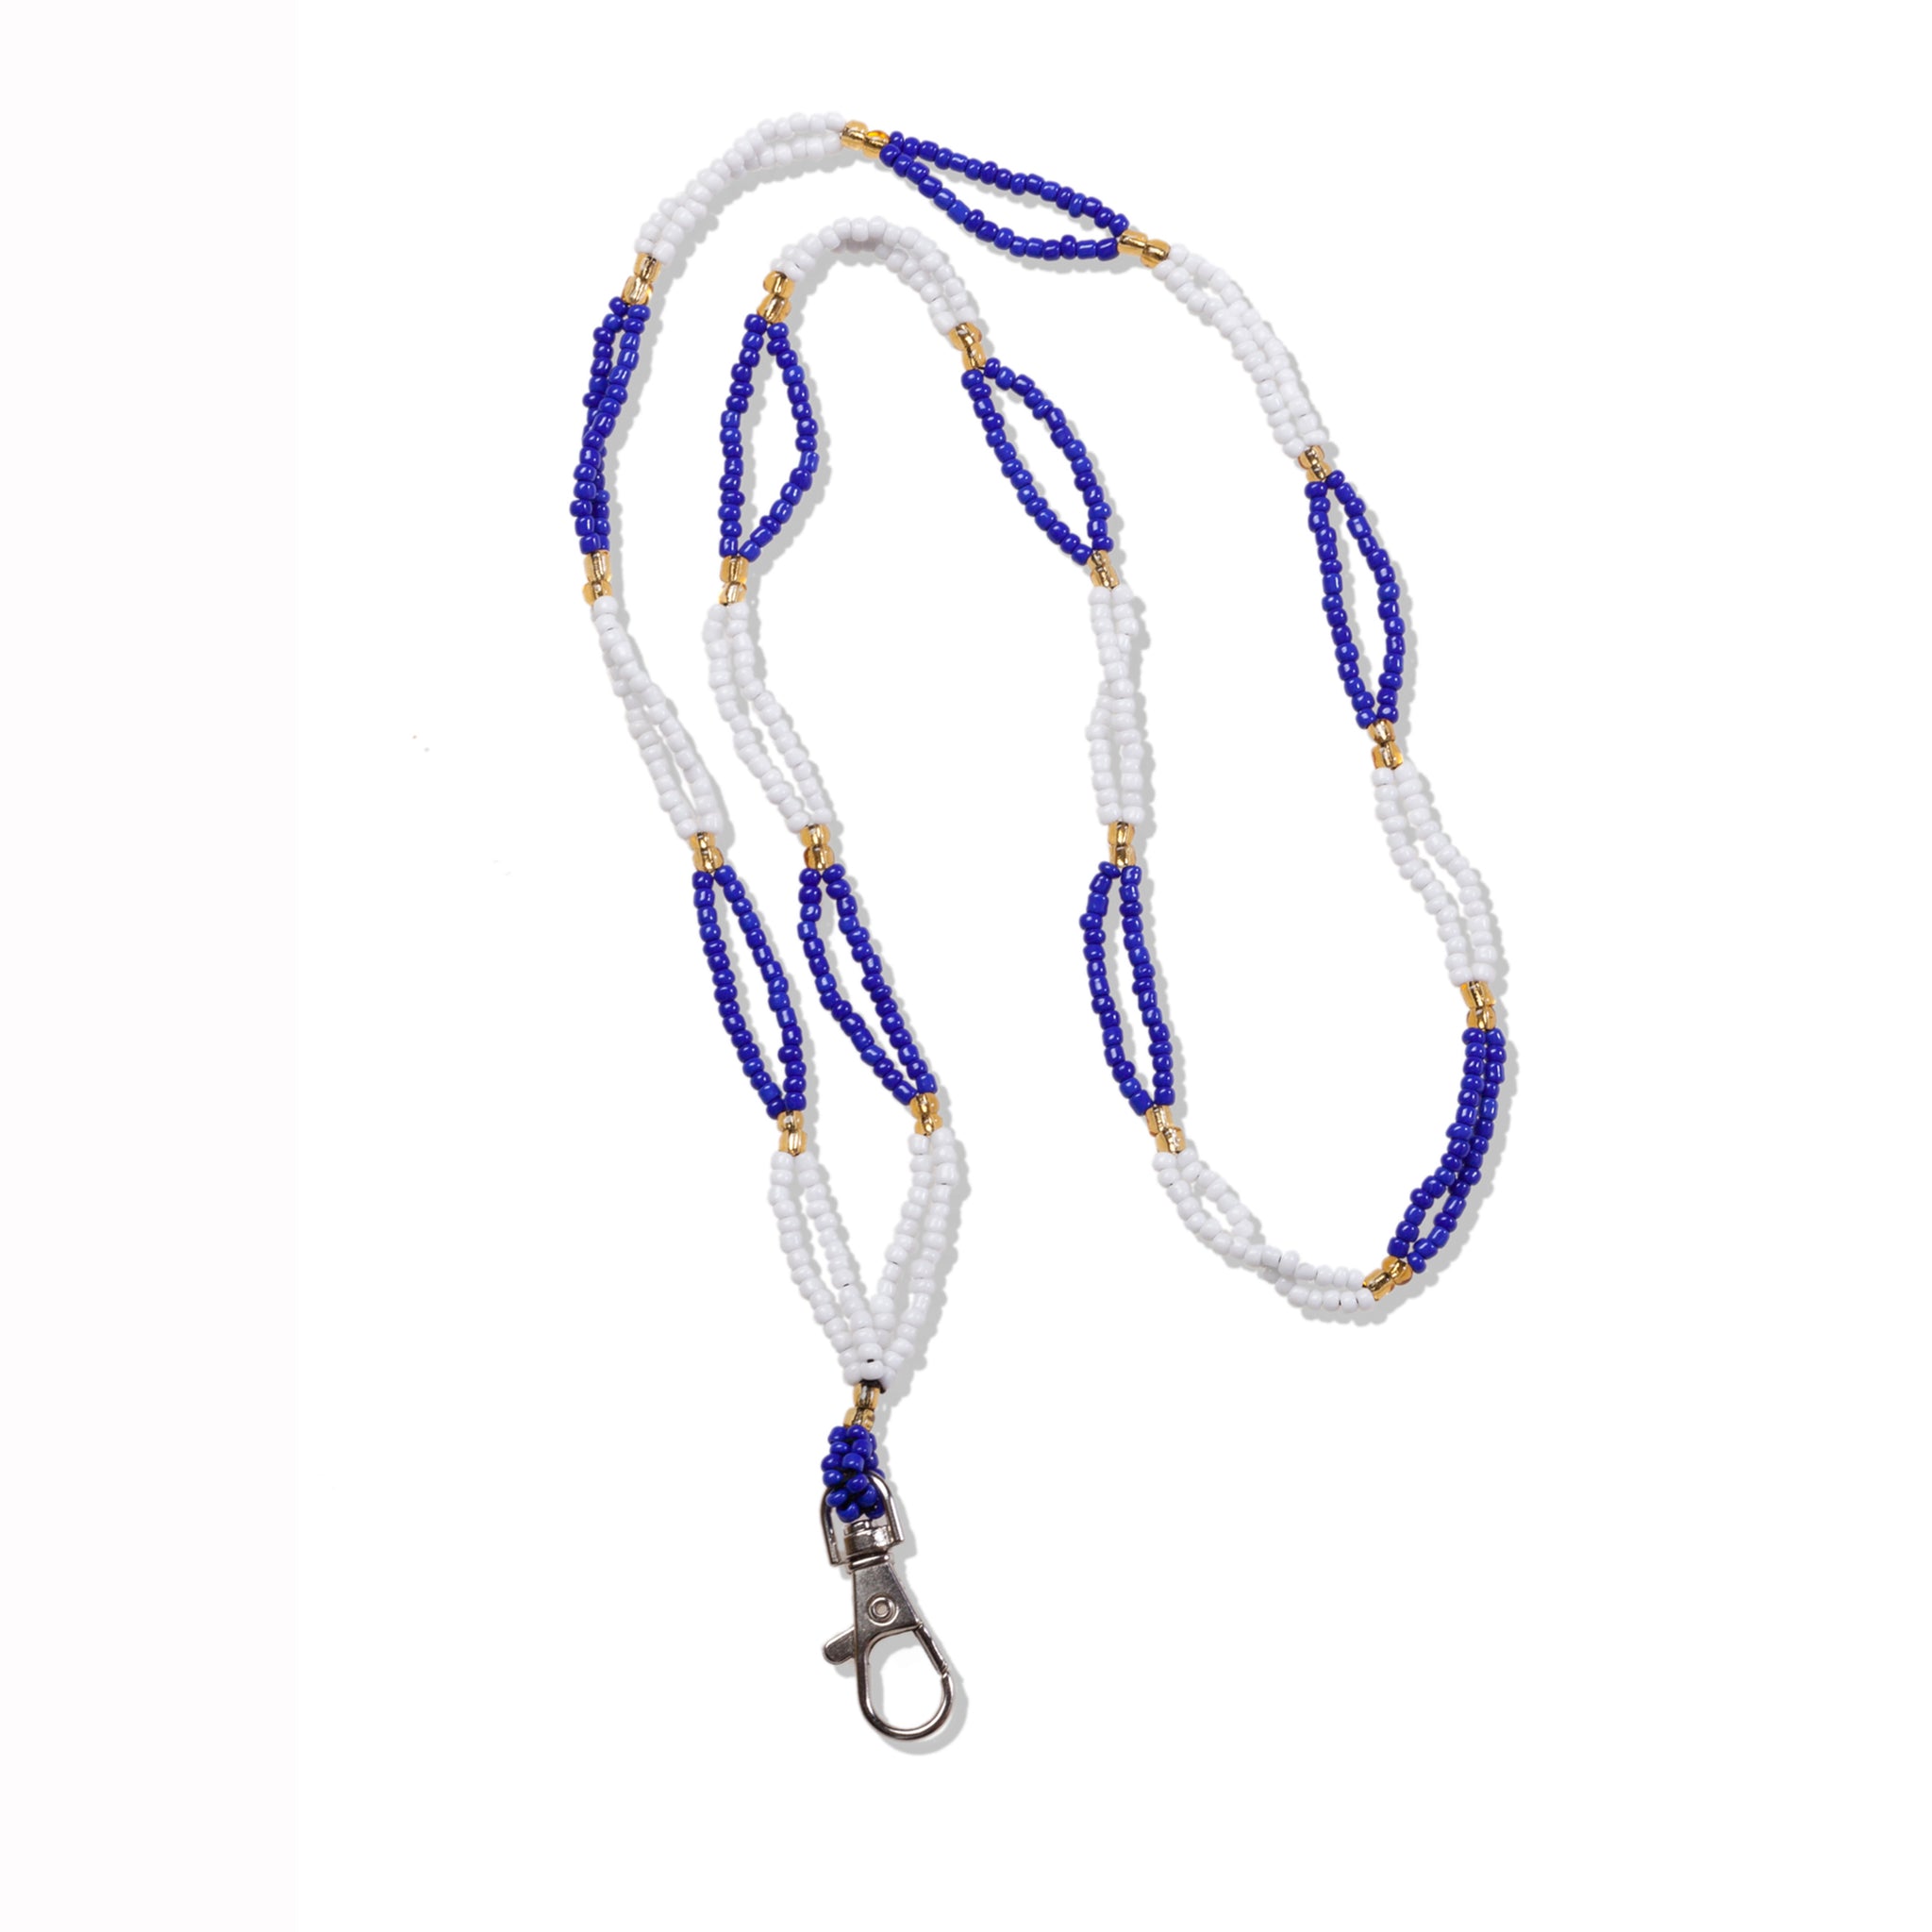 Kidz Positive Beading Project Beaded Lanyard Double String Lanyard with Snap Hook White Gold Blue